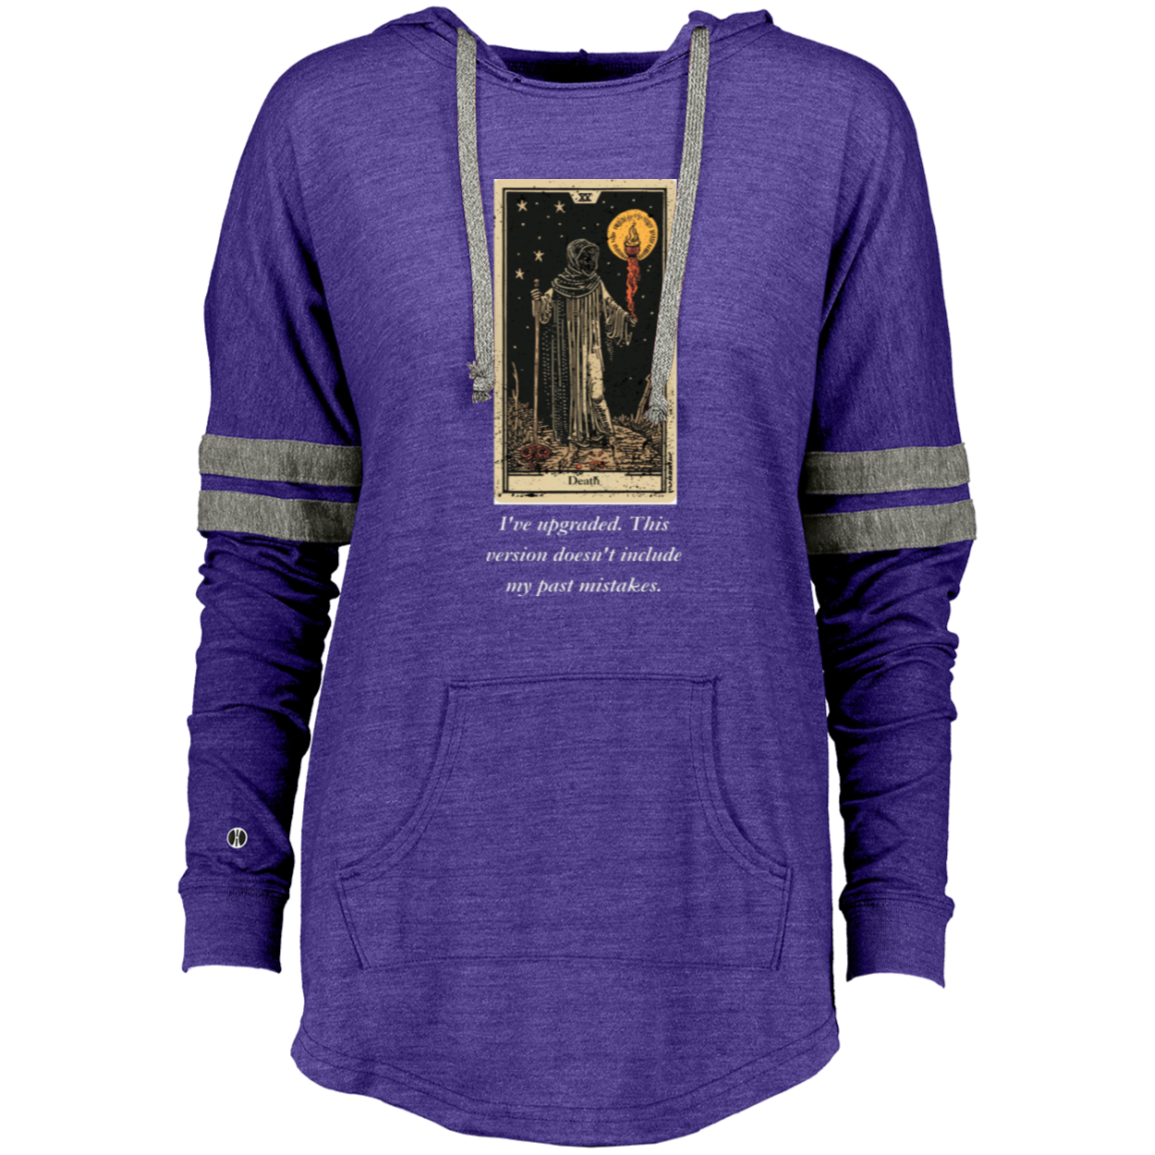 Funny death women's purple tarot card hoodie pullover from BLK Moon Shop